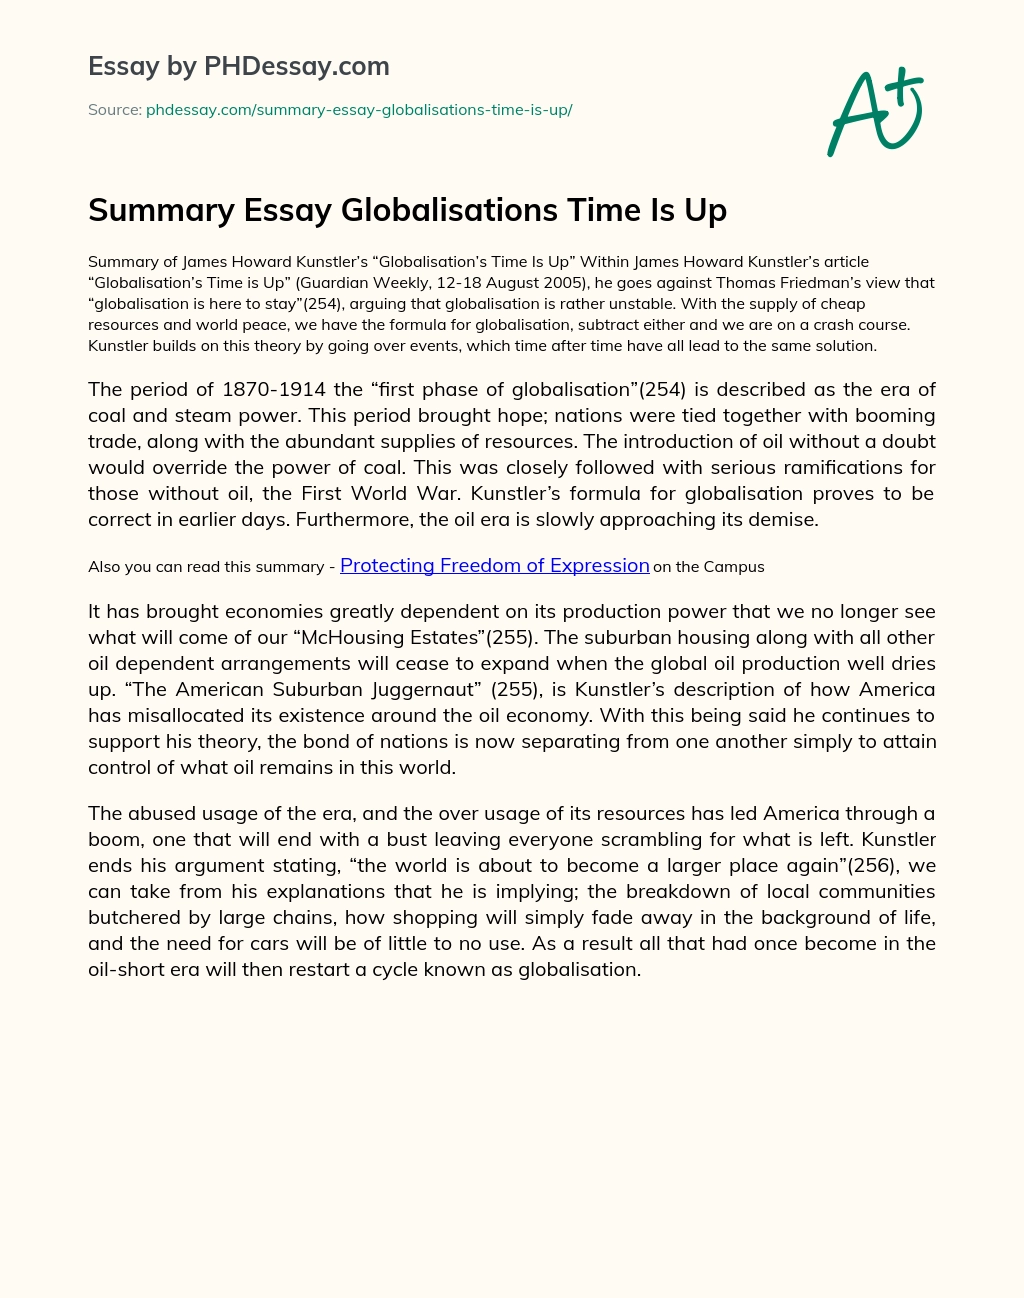 Summary Essay Globalisations Time Is Up essay